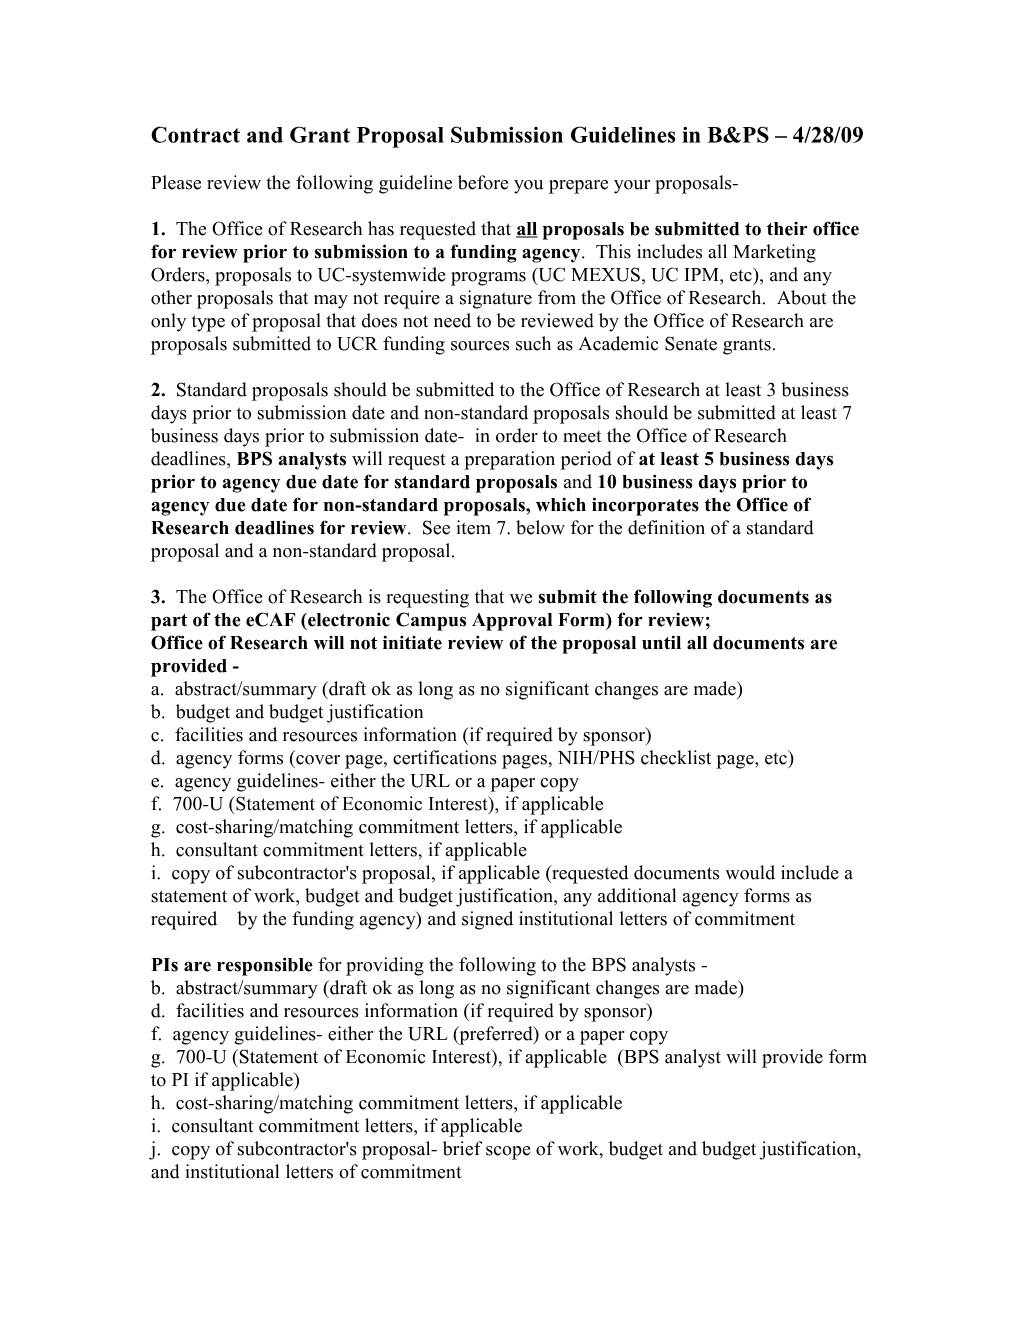 Contract and Grant Proposal Submission Guidelines in B&PS 4/28/09